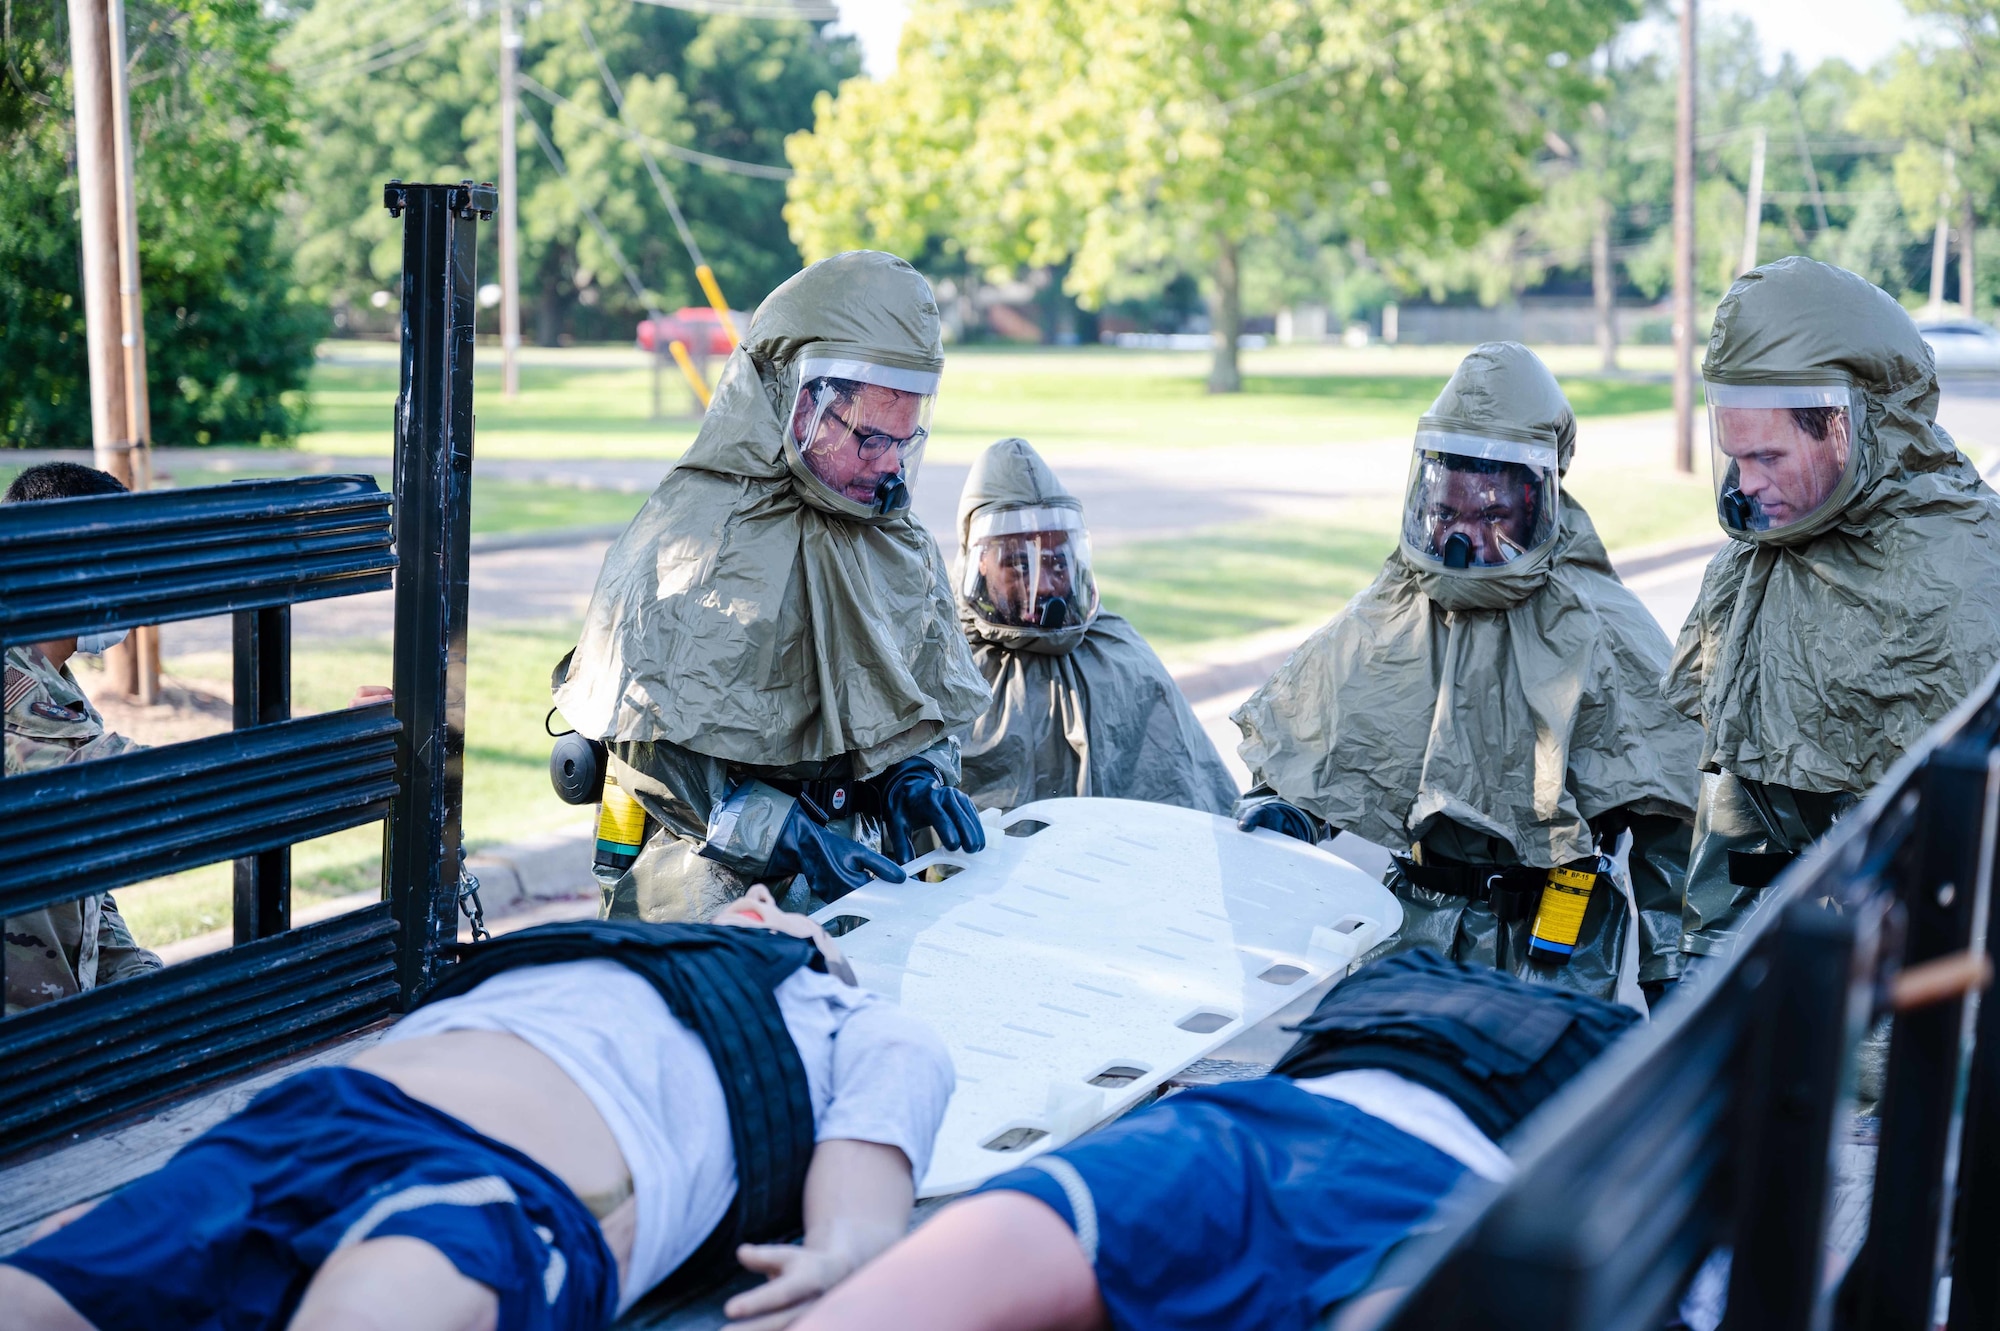 The exercise scenario involved victims of chemical attacks, and the medical team was evaluated on how they handled the situation